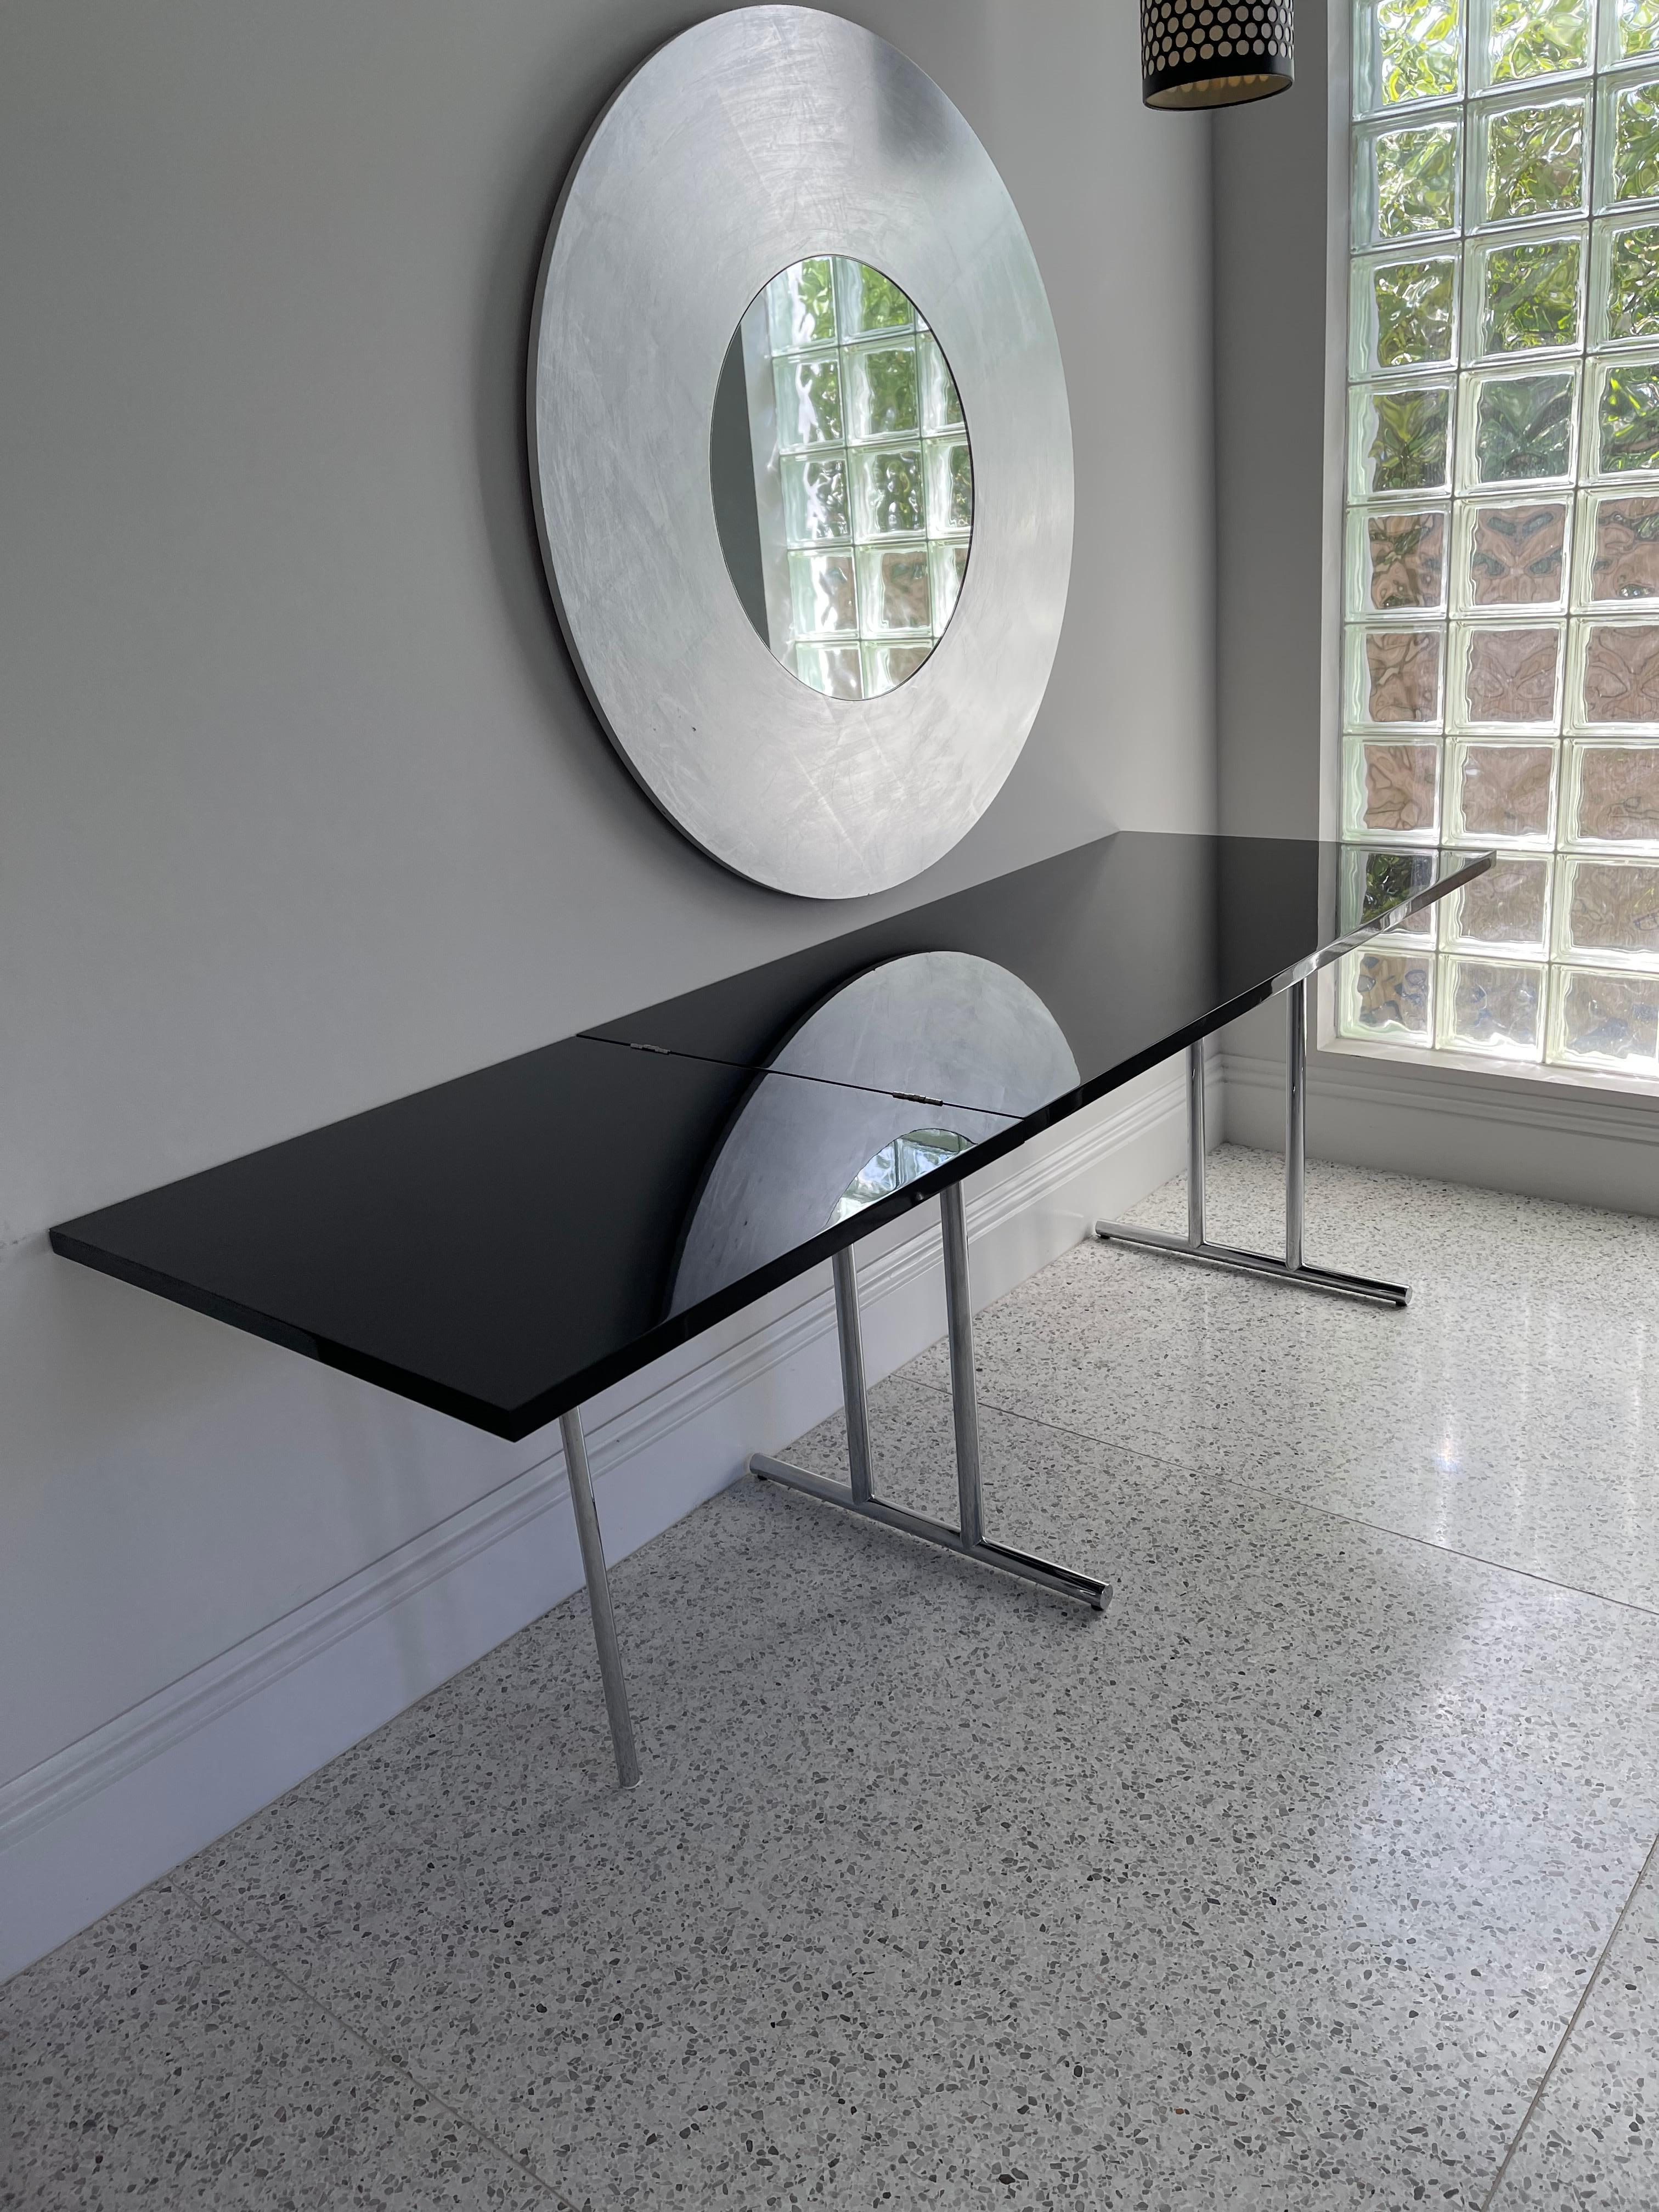 Like the majority of Eileen Gray‘s tables, this one too can transform itself. And as always she found an unexpected solution. The folding section of the tabletop is supported by a single leg out of chrome-plated ubular steel – a conscious break in